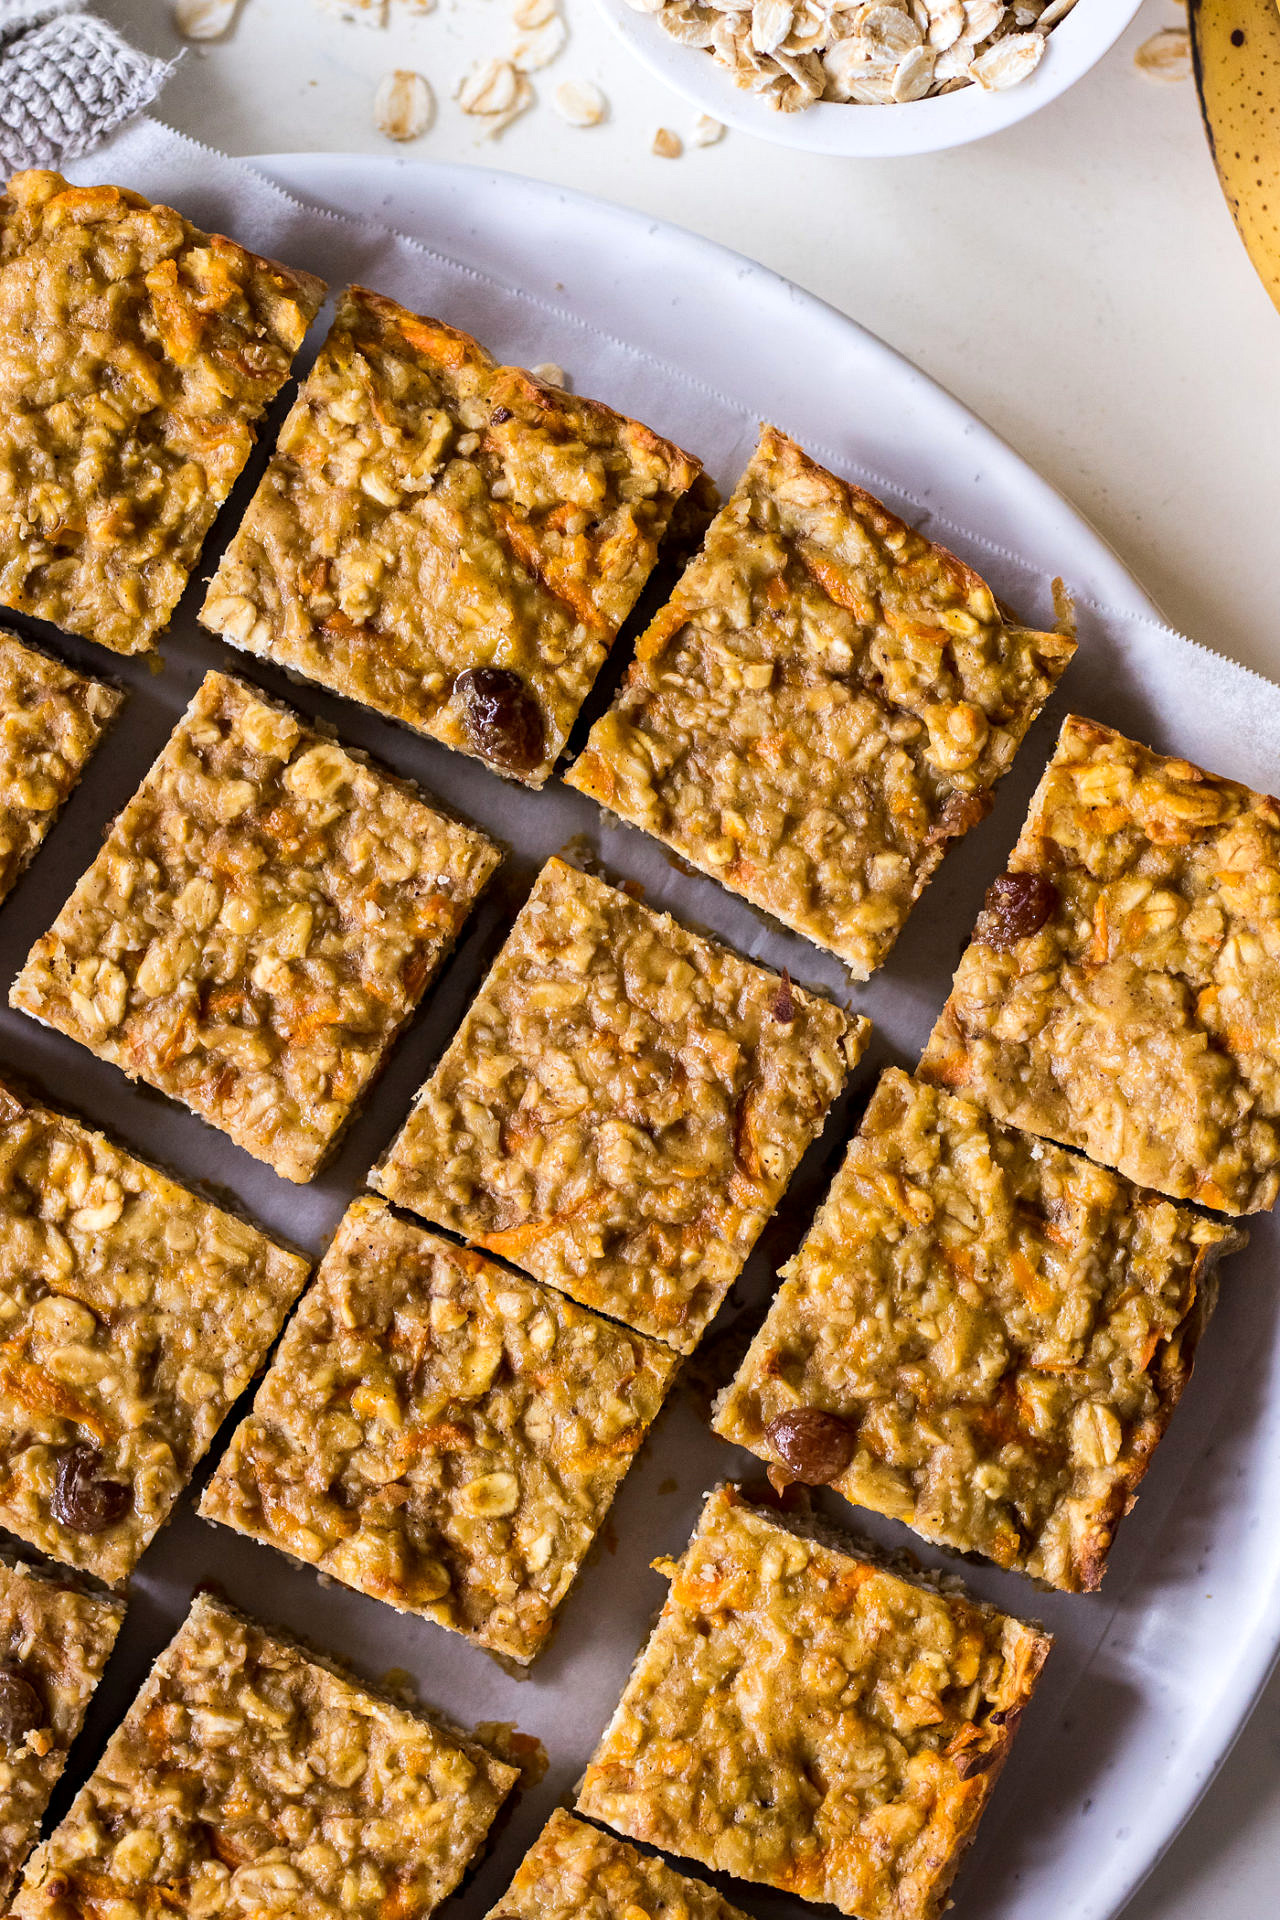 Square oatmeal bars with carrot and sultanas on a round ceramic plate